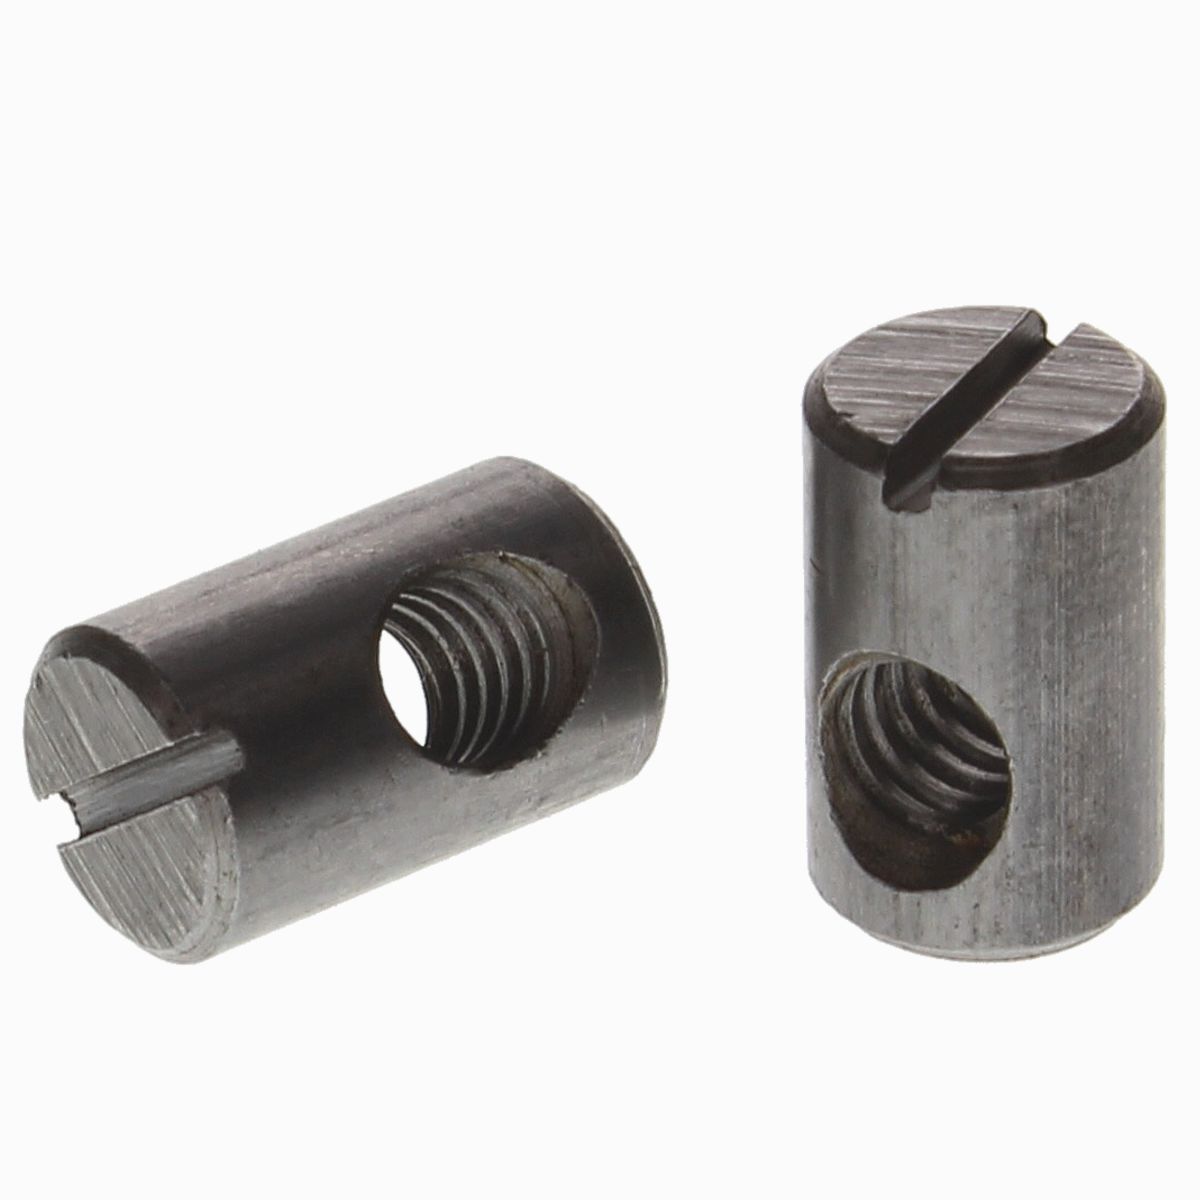 1/4-20 x 16mm Joint Connector Dowels Offset Drilled, 10/PKG